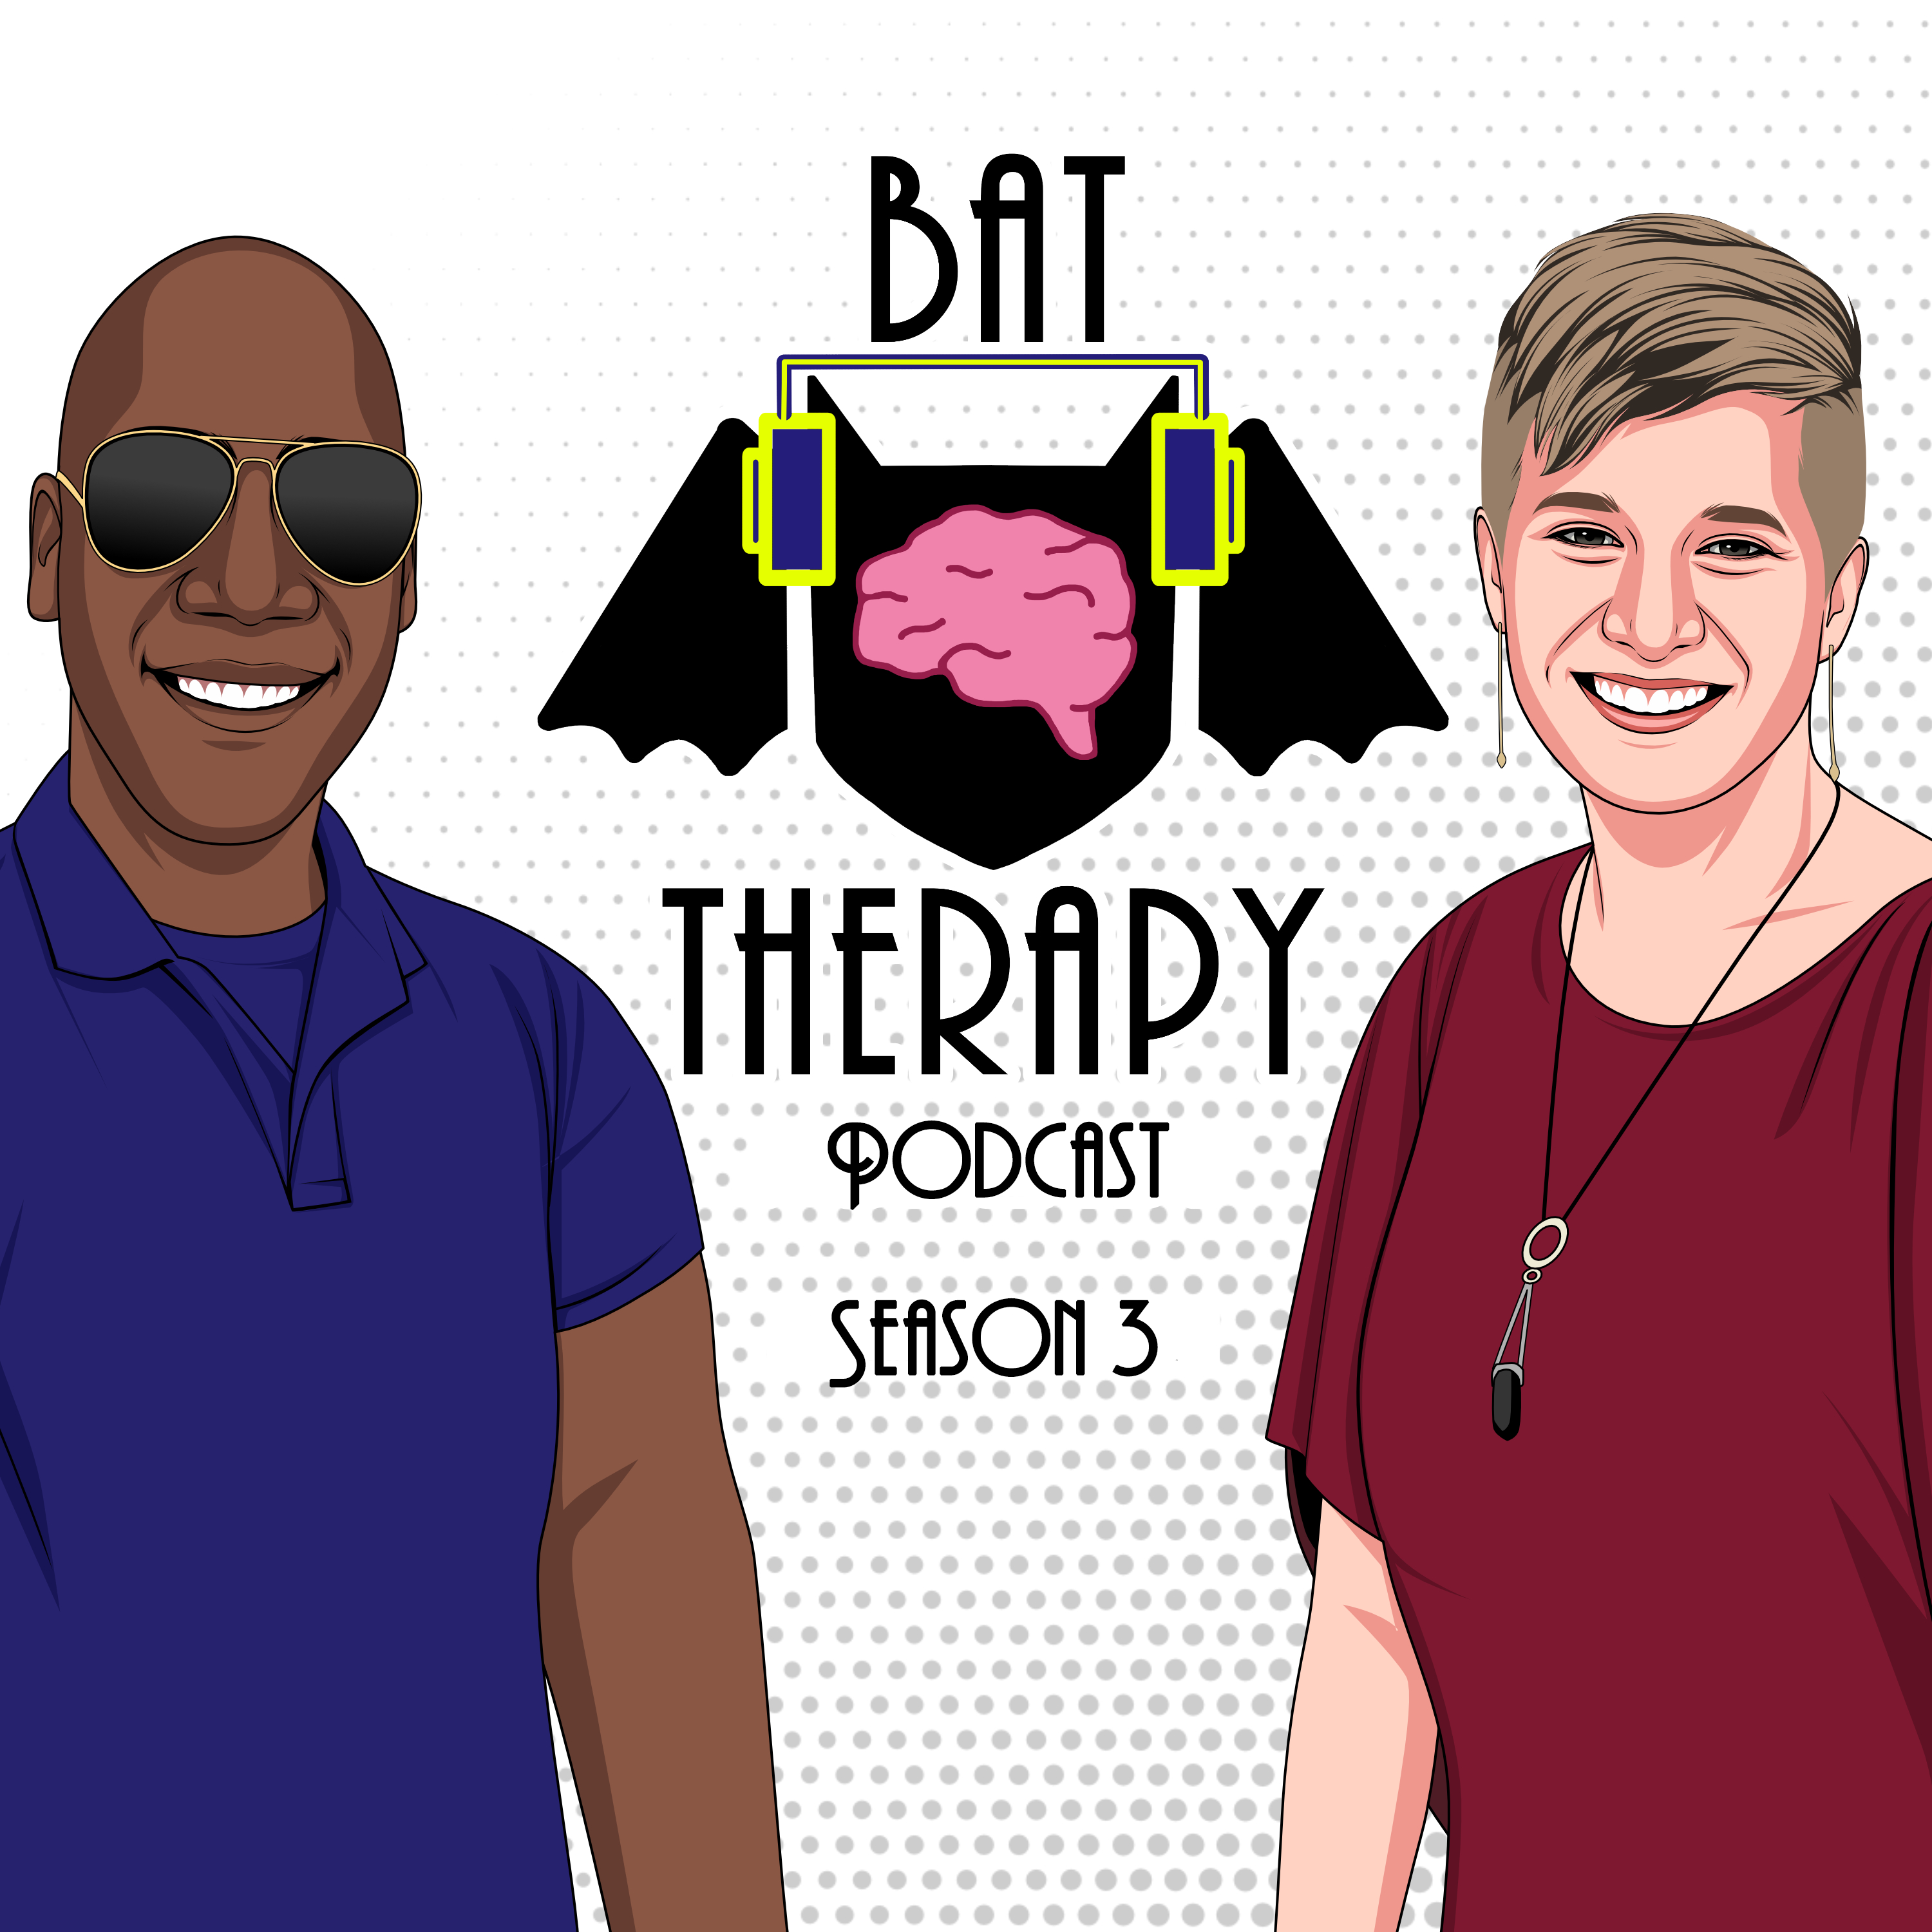 Bat Therapy Podcast